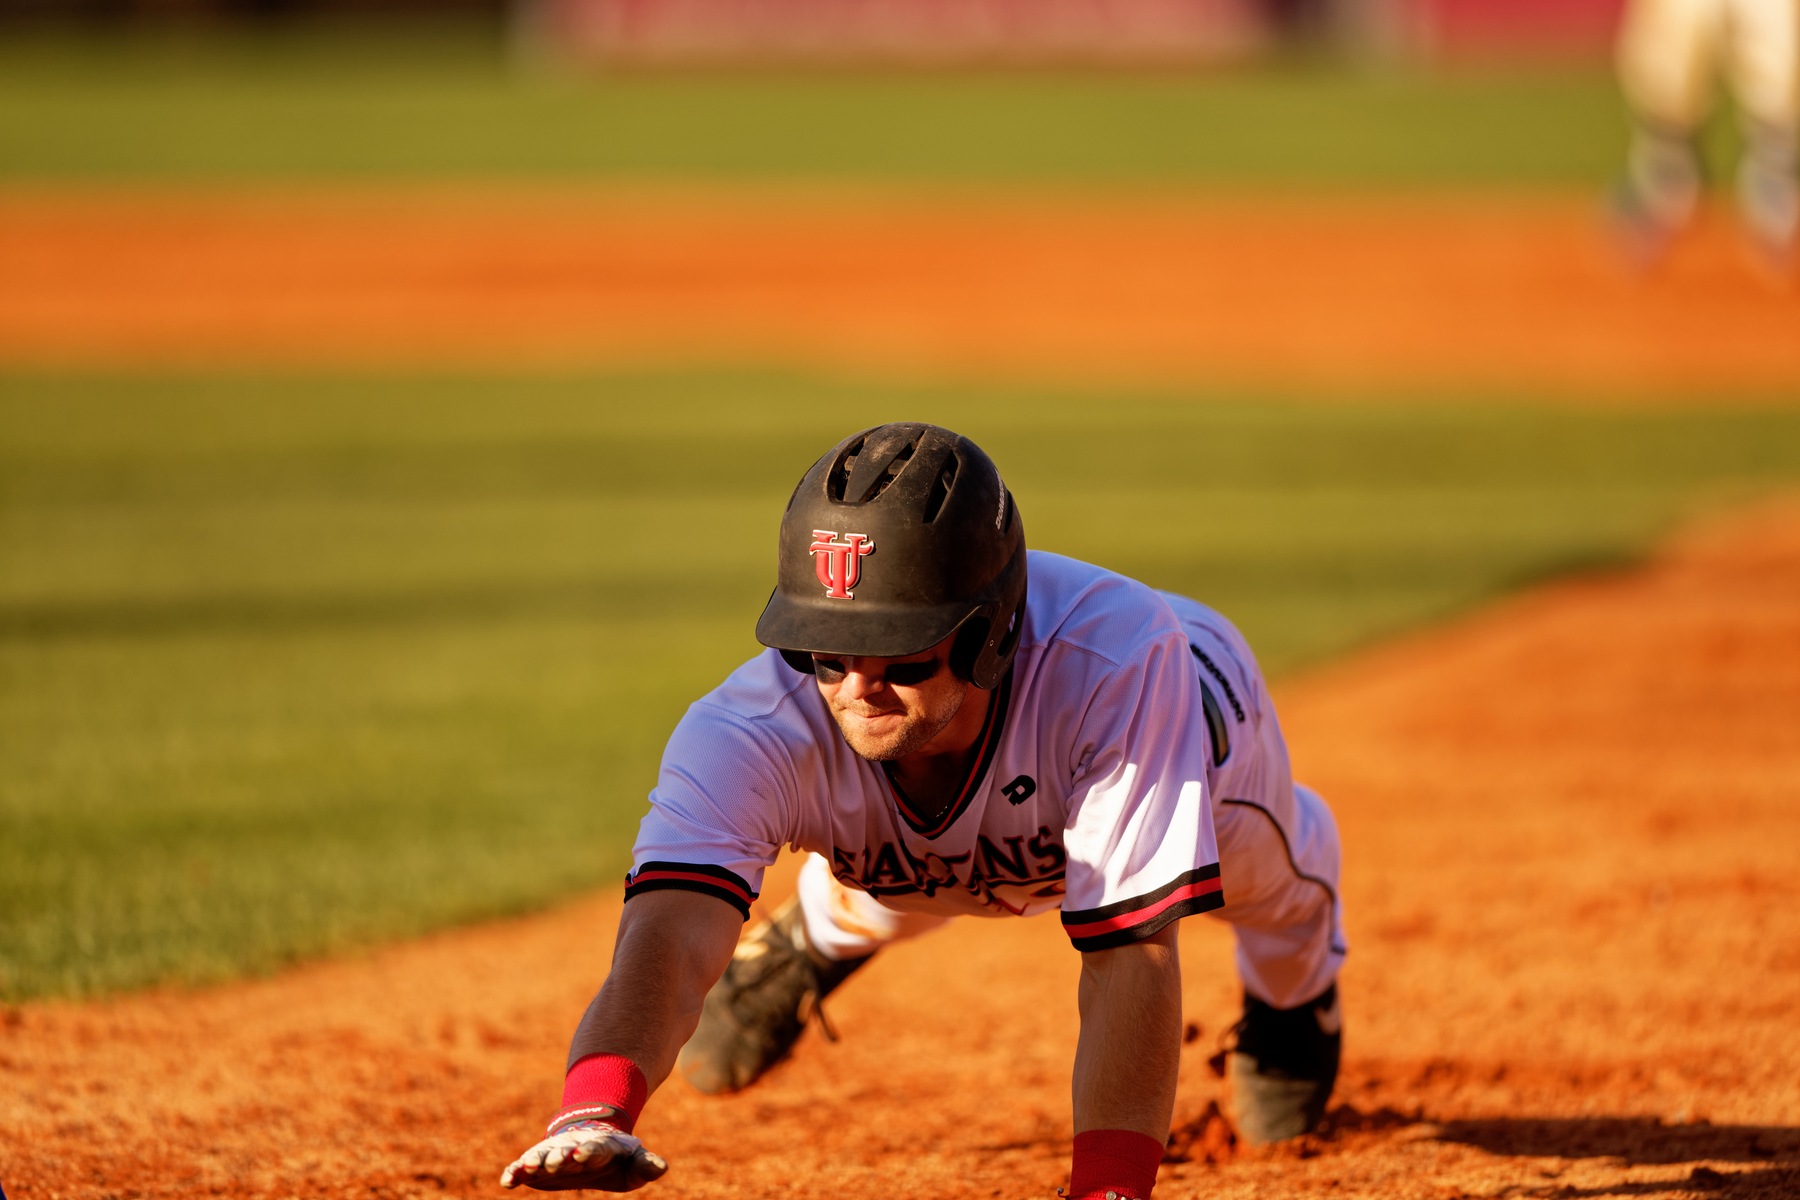 #1 Tampa Splits Doubleheader With Lions